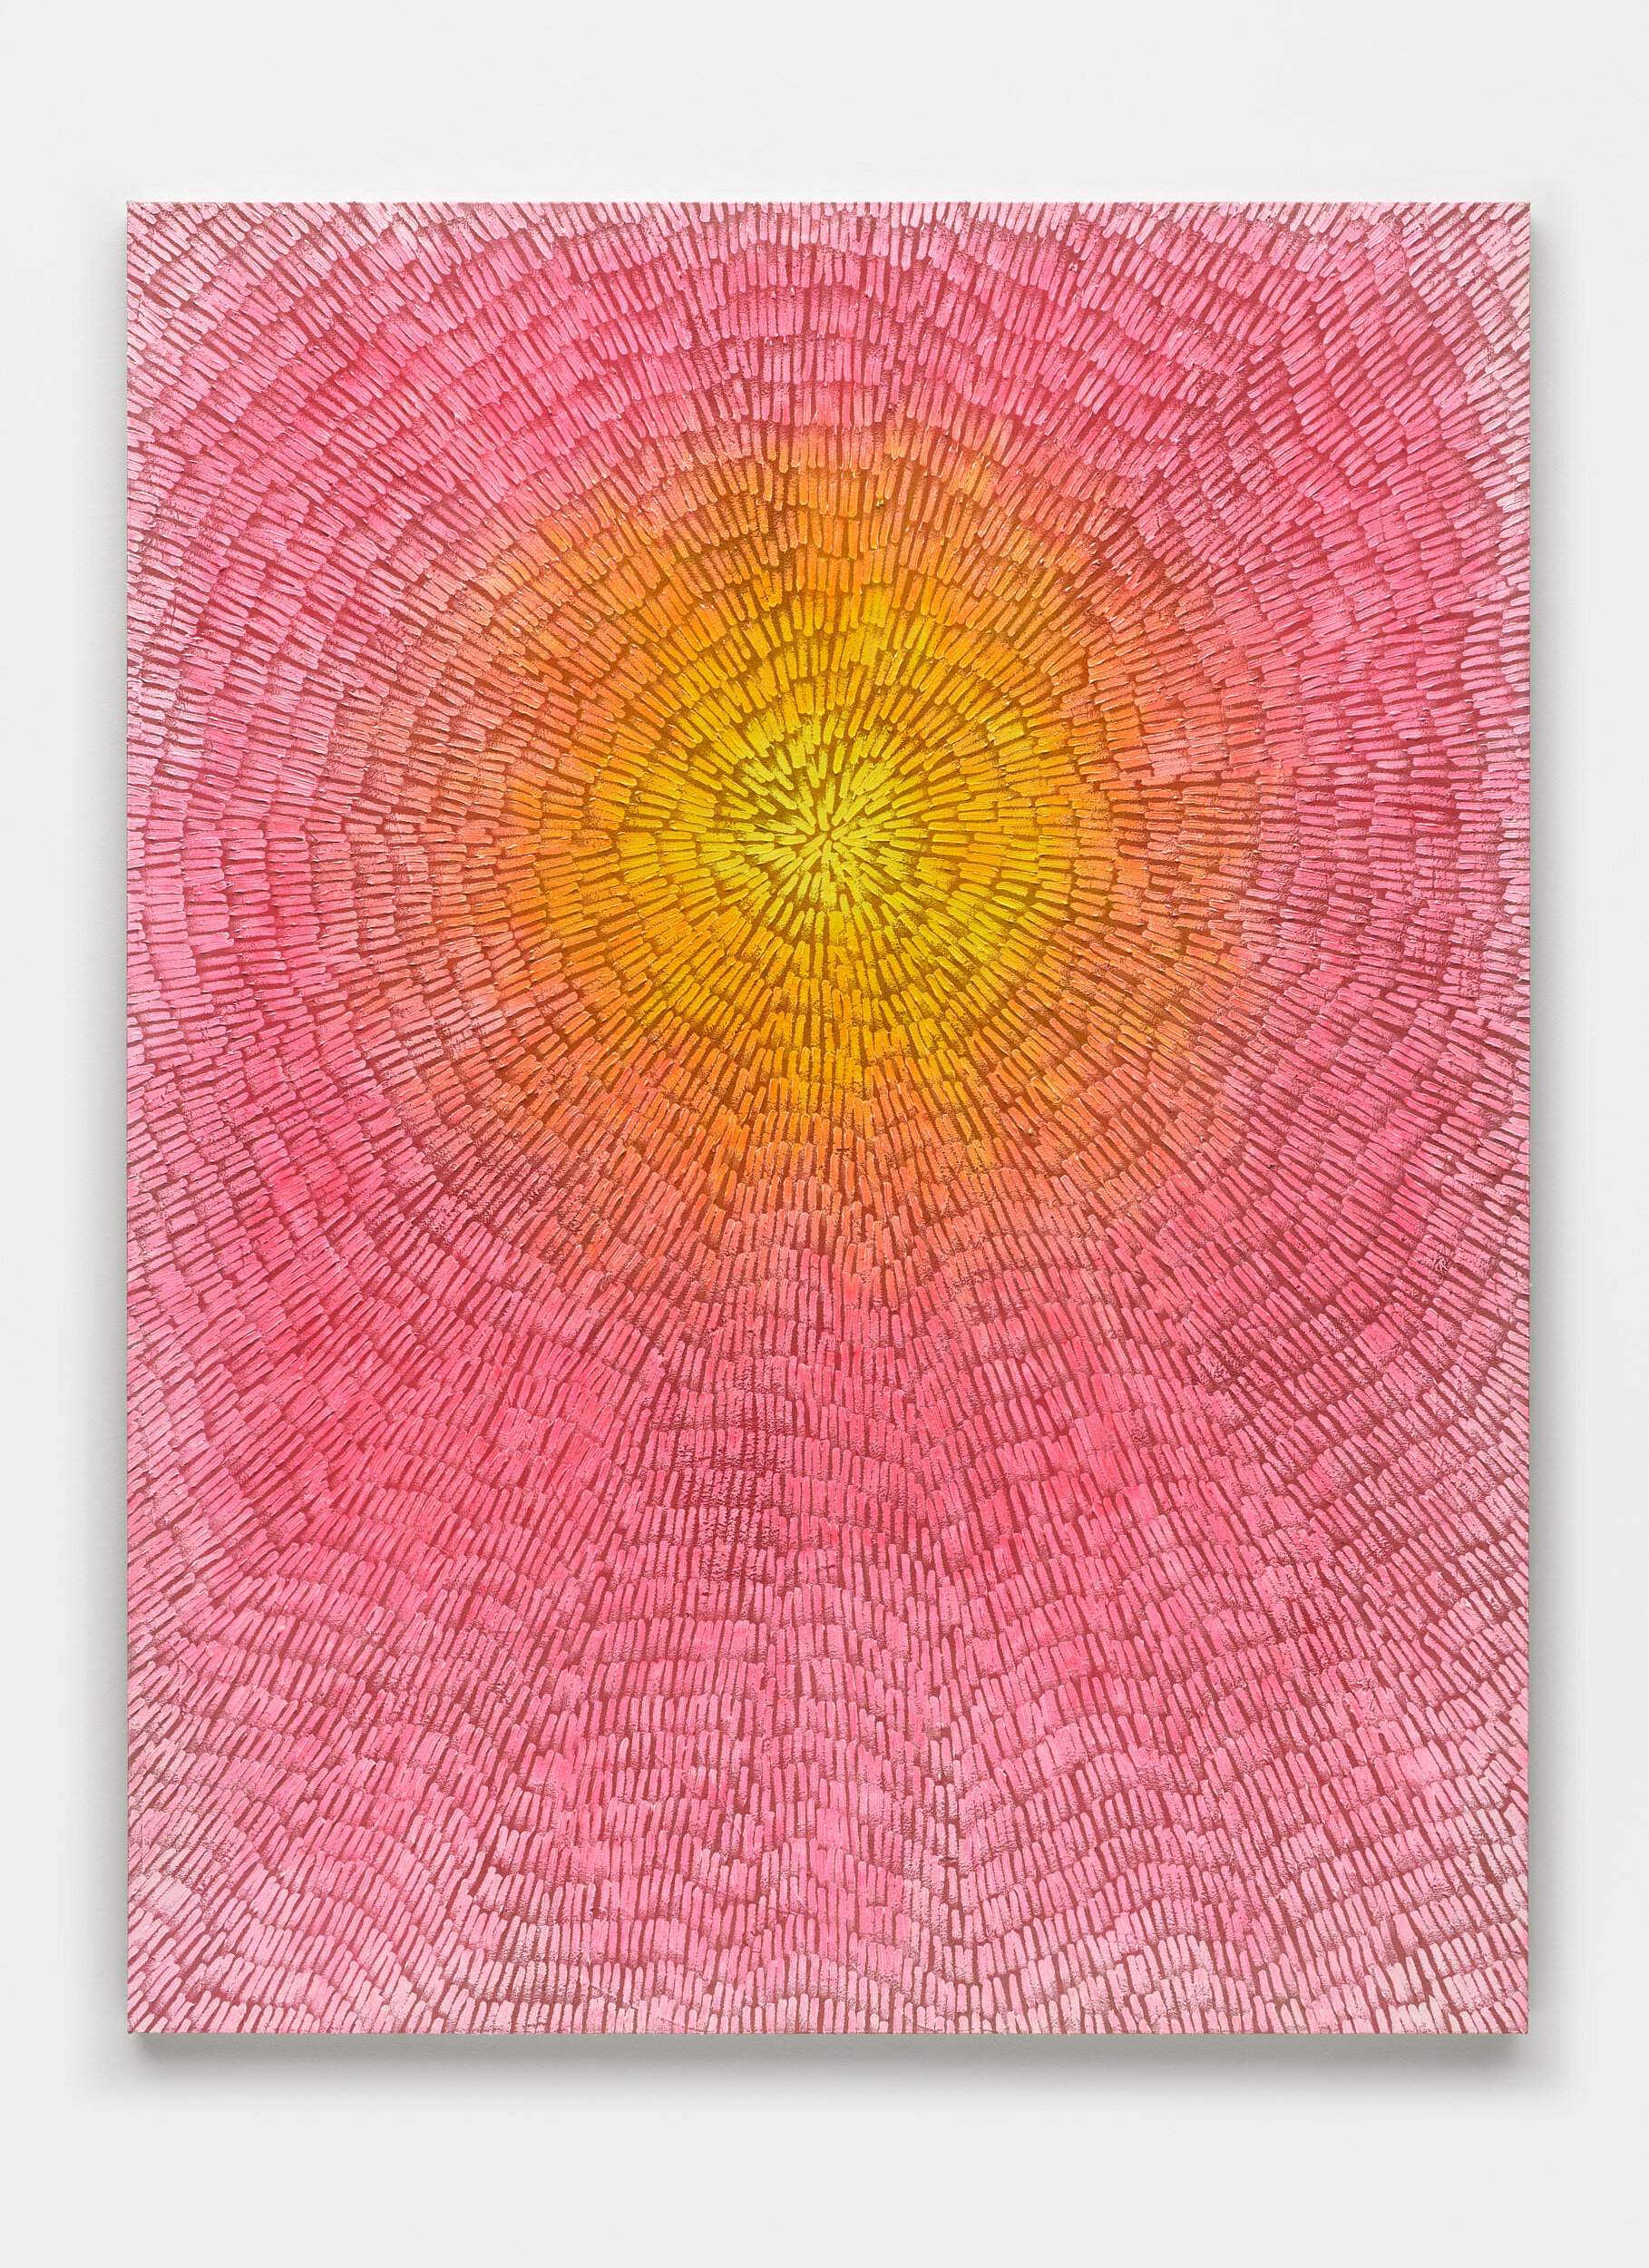  Seeking Joy, 2020  Sand, acrylic and oil on linen  76 x 58 inches  